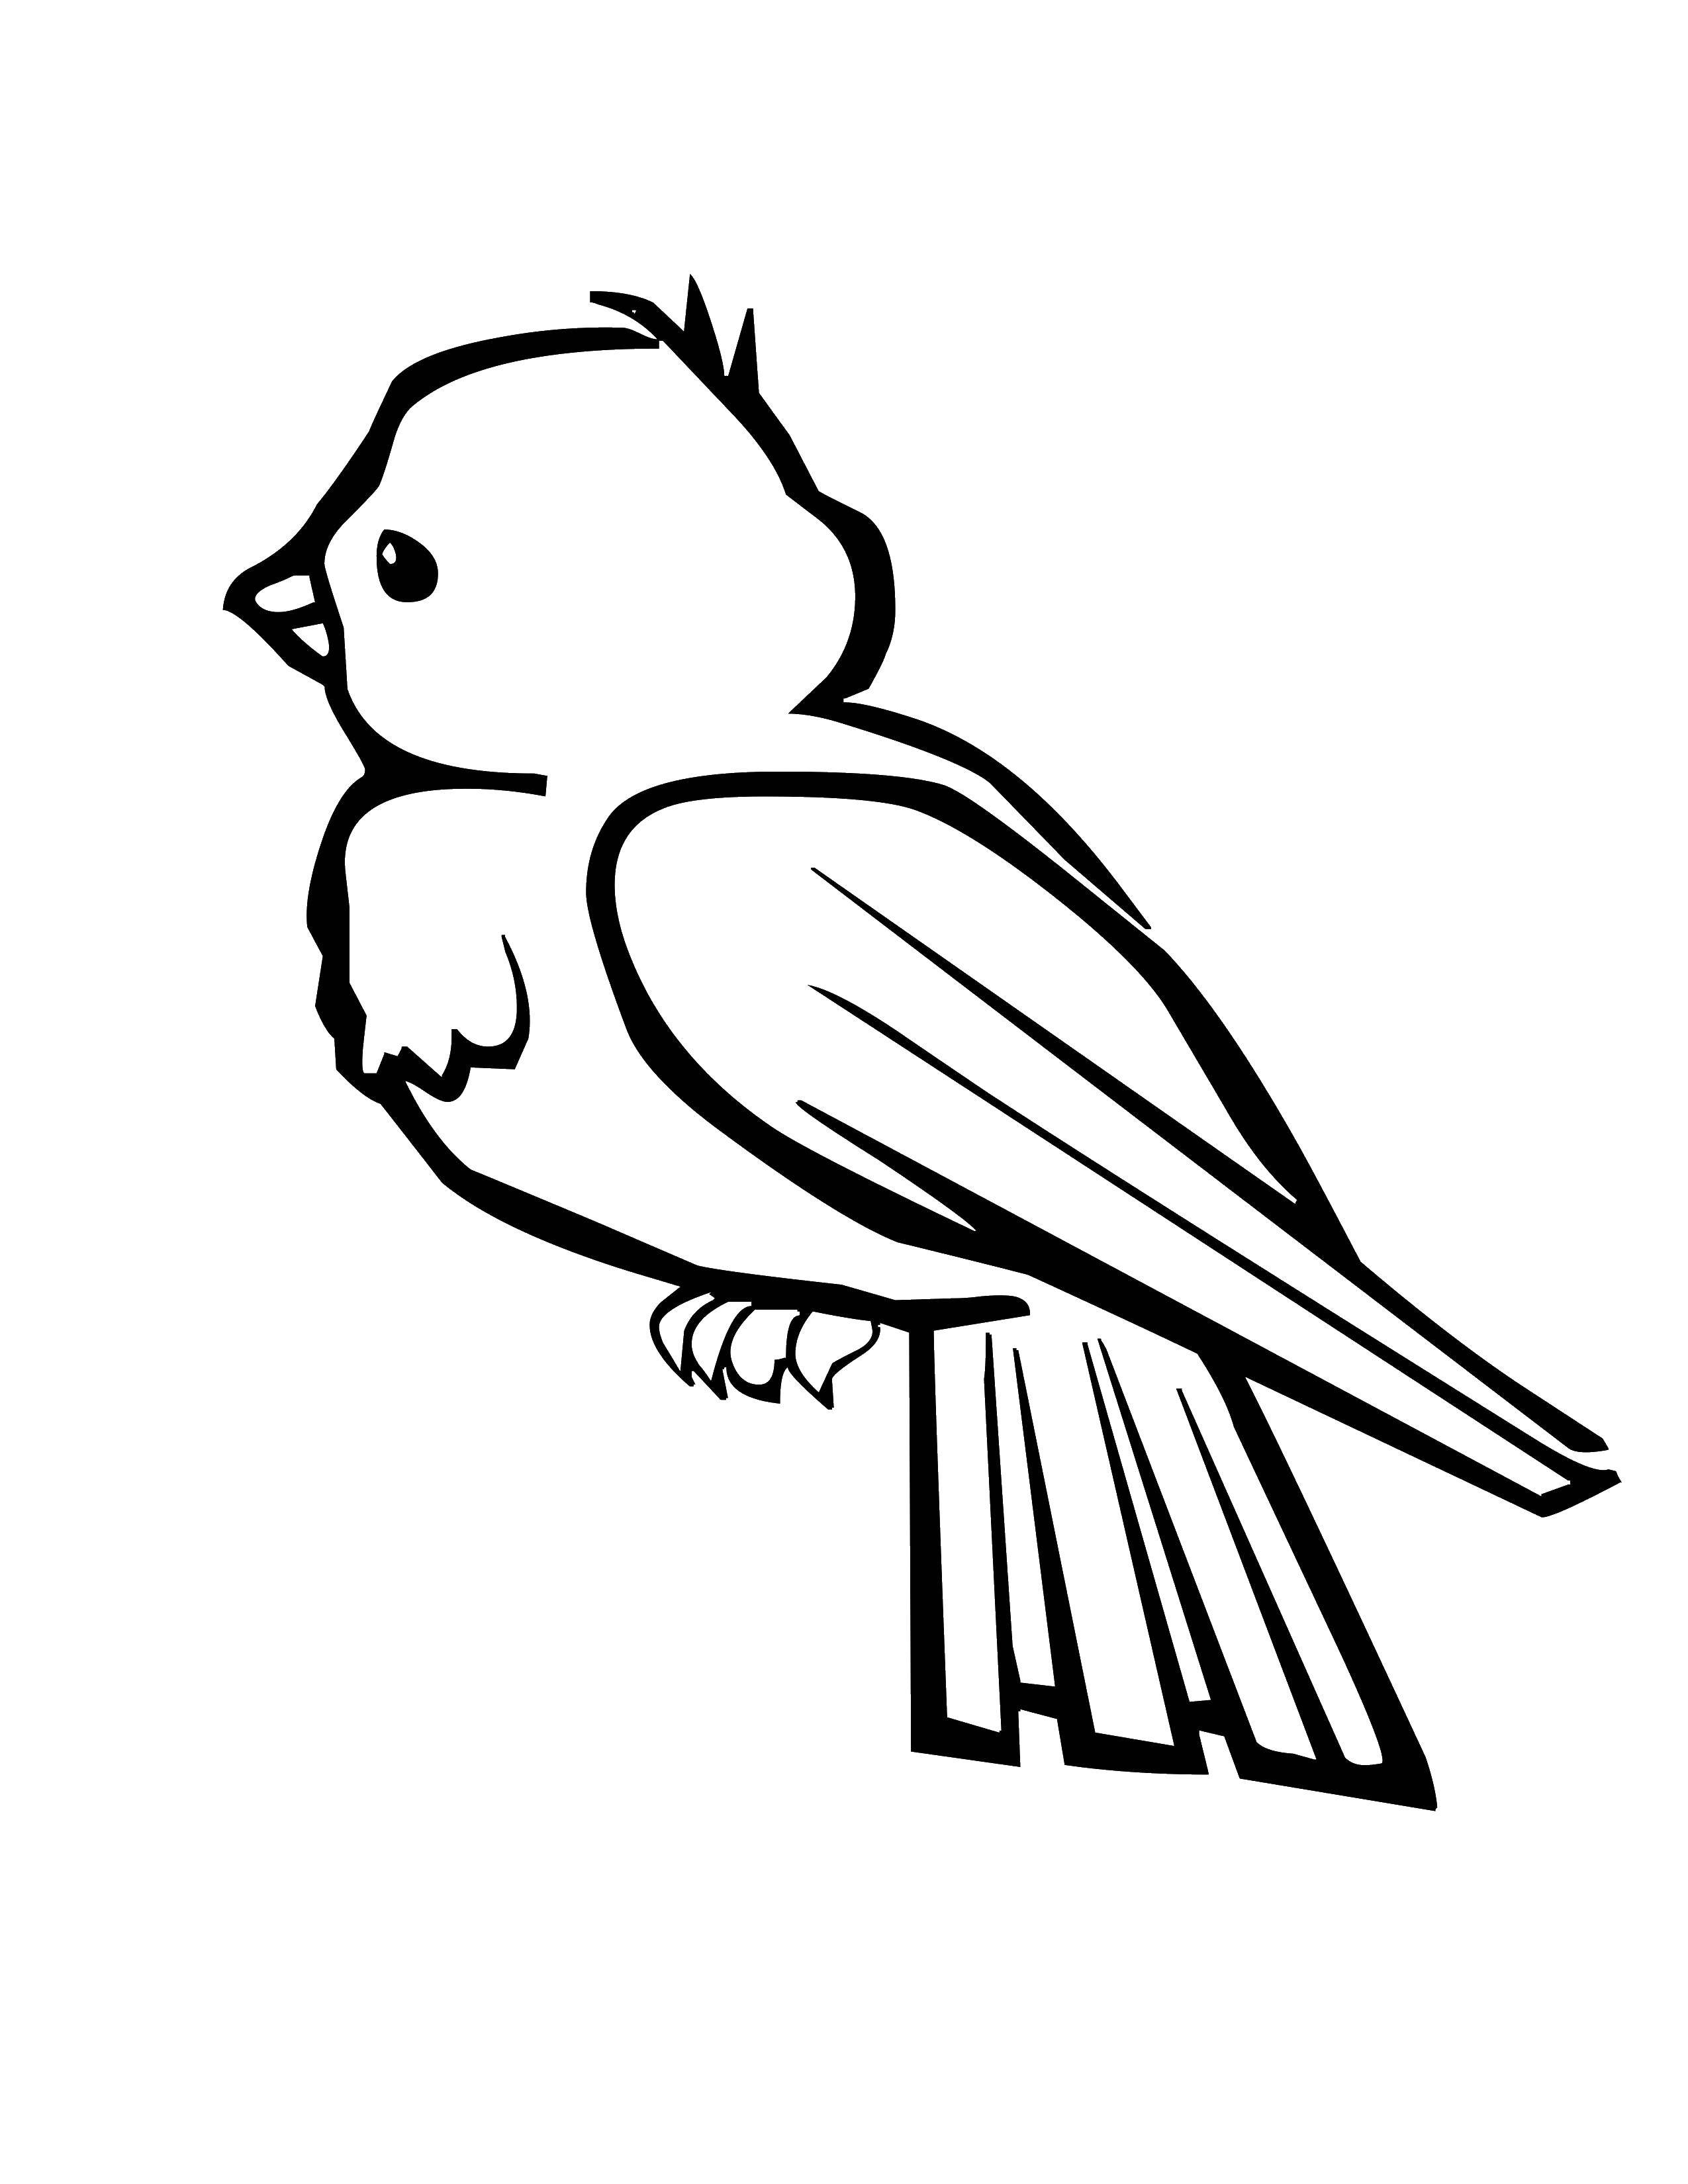 Coloring Bird. Category Birds. Tags:  birds, feathers.